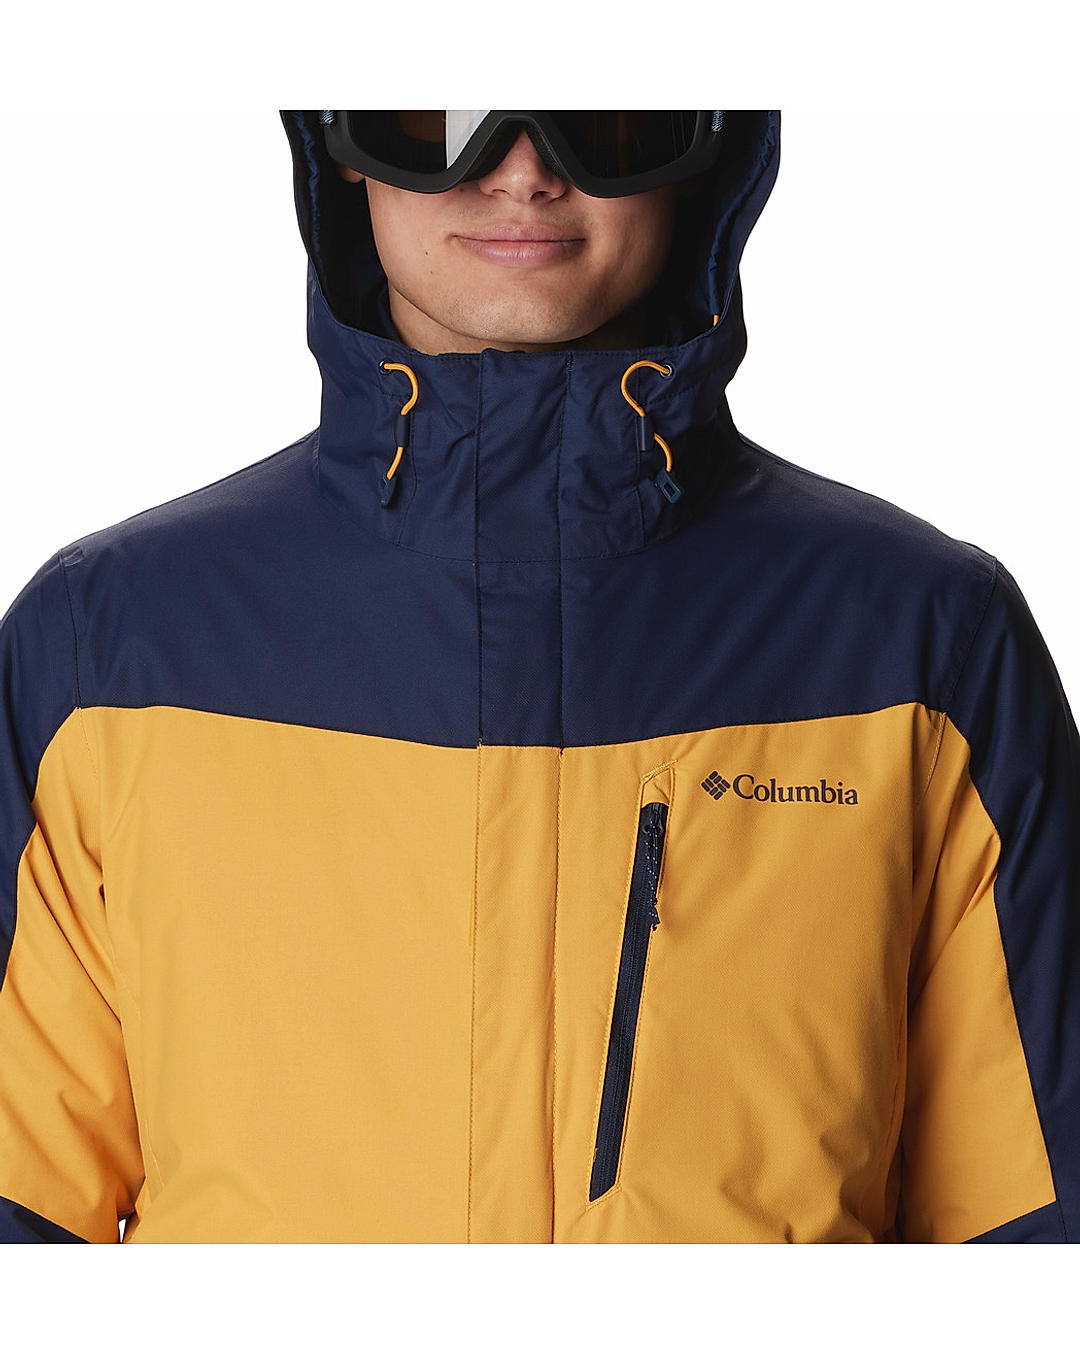 Mens Quilted Yellow Jacket | Quilted Shoulder Jacket for Sale